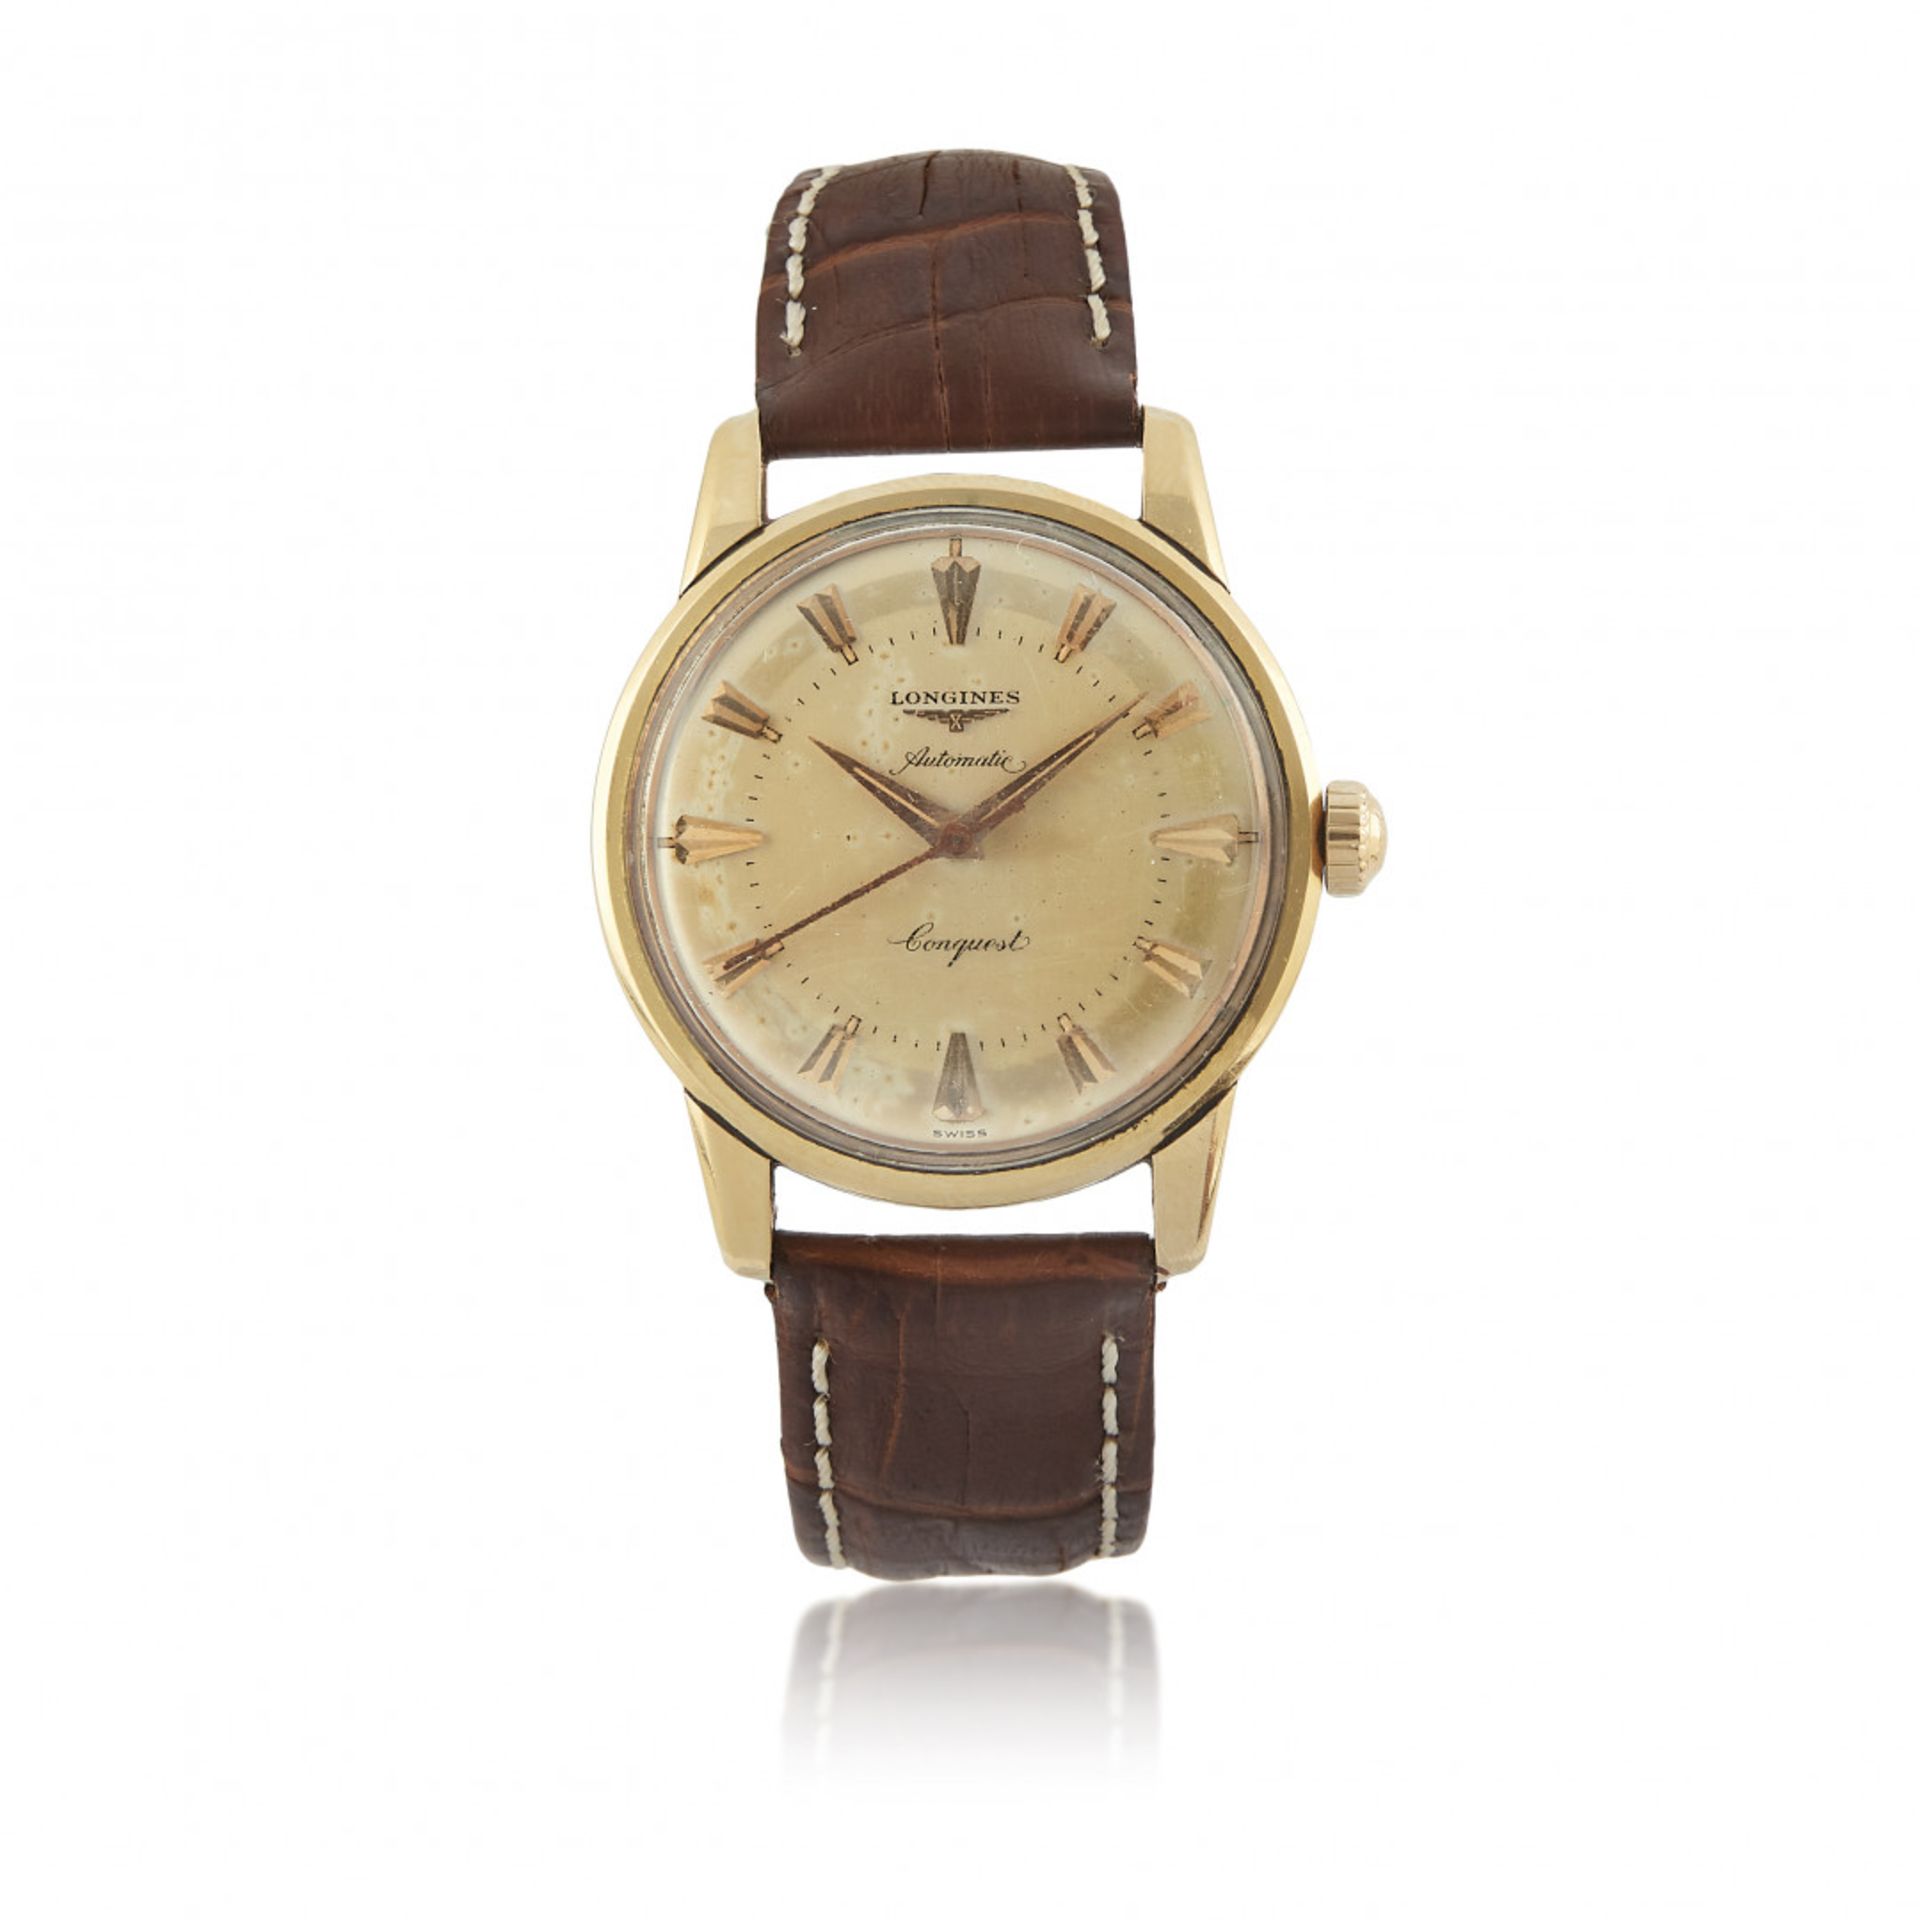 LONGINES CONQUEST REF. 9001 IN GOLD, 60s